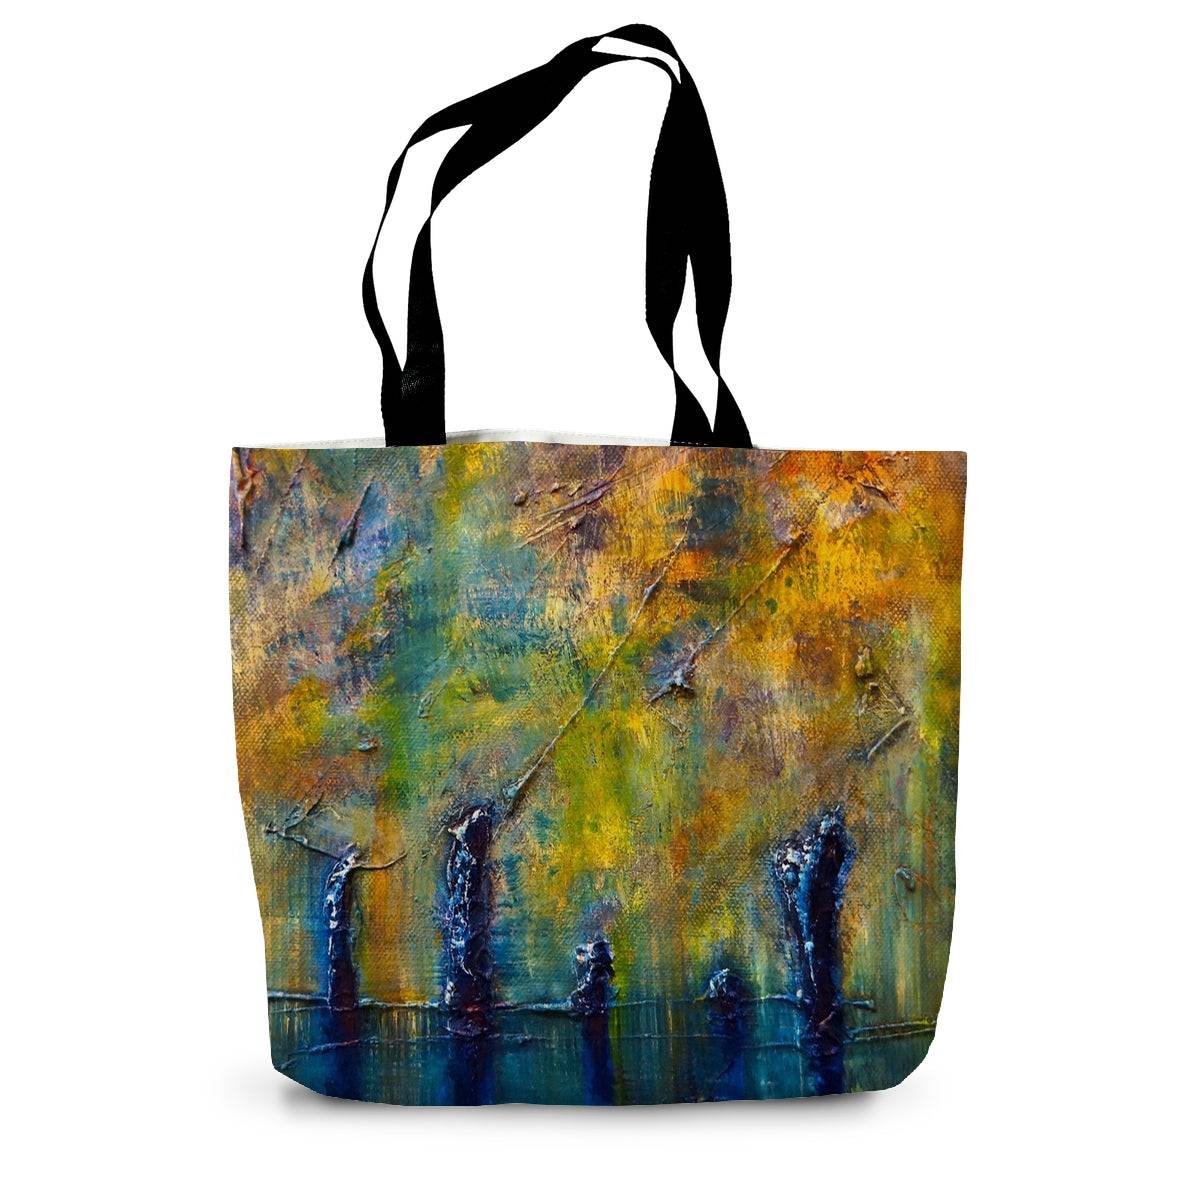 Stenness Moonlight Orkney Art Gifts Canvas Tote Bag-Bags-Orkney Art Gallery-14"x18.5"-Paintings, Prints, Homeware, Art Gifts From Scotland By Scottish Artist Kevin Hunter